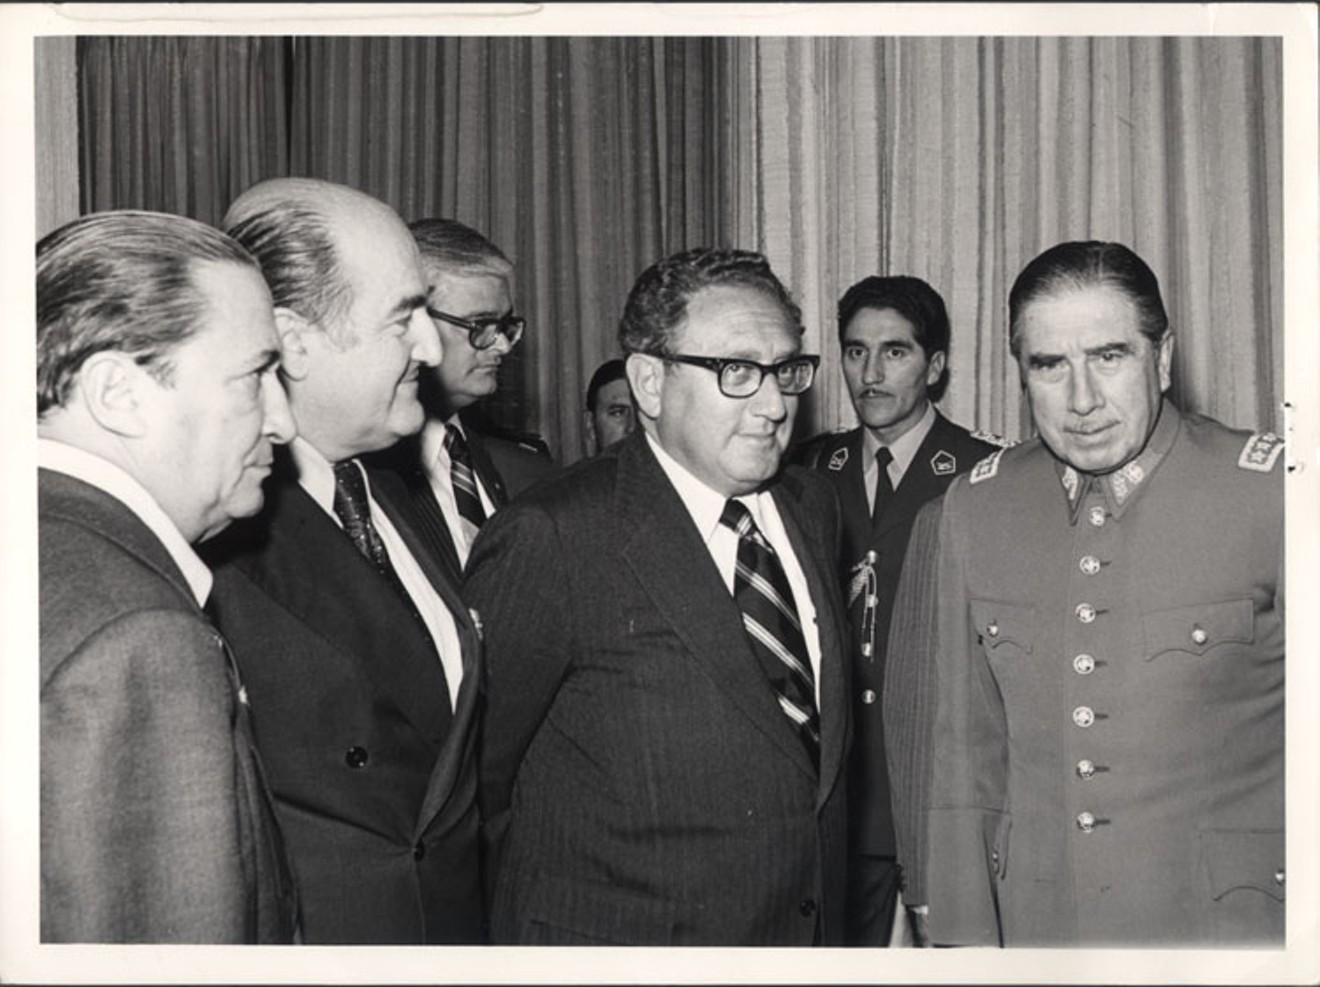 Former Secretary of State Henry Kissinger (middle) meeting ex-Chilean dictator Augusto Pinochet in 1975.